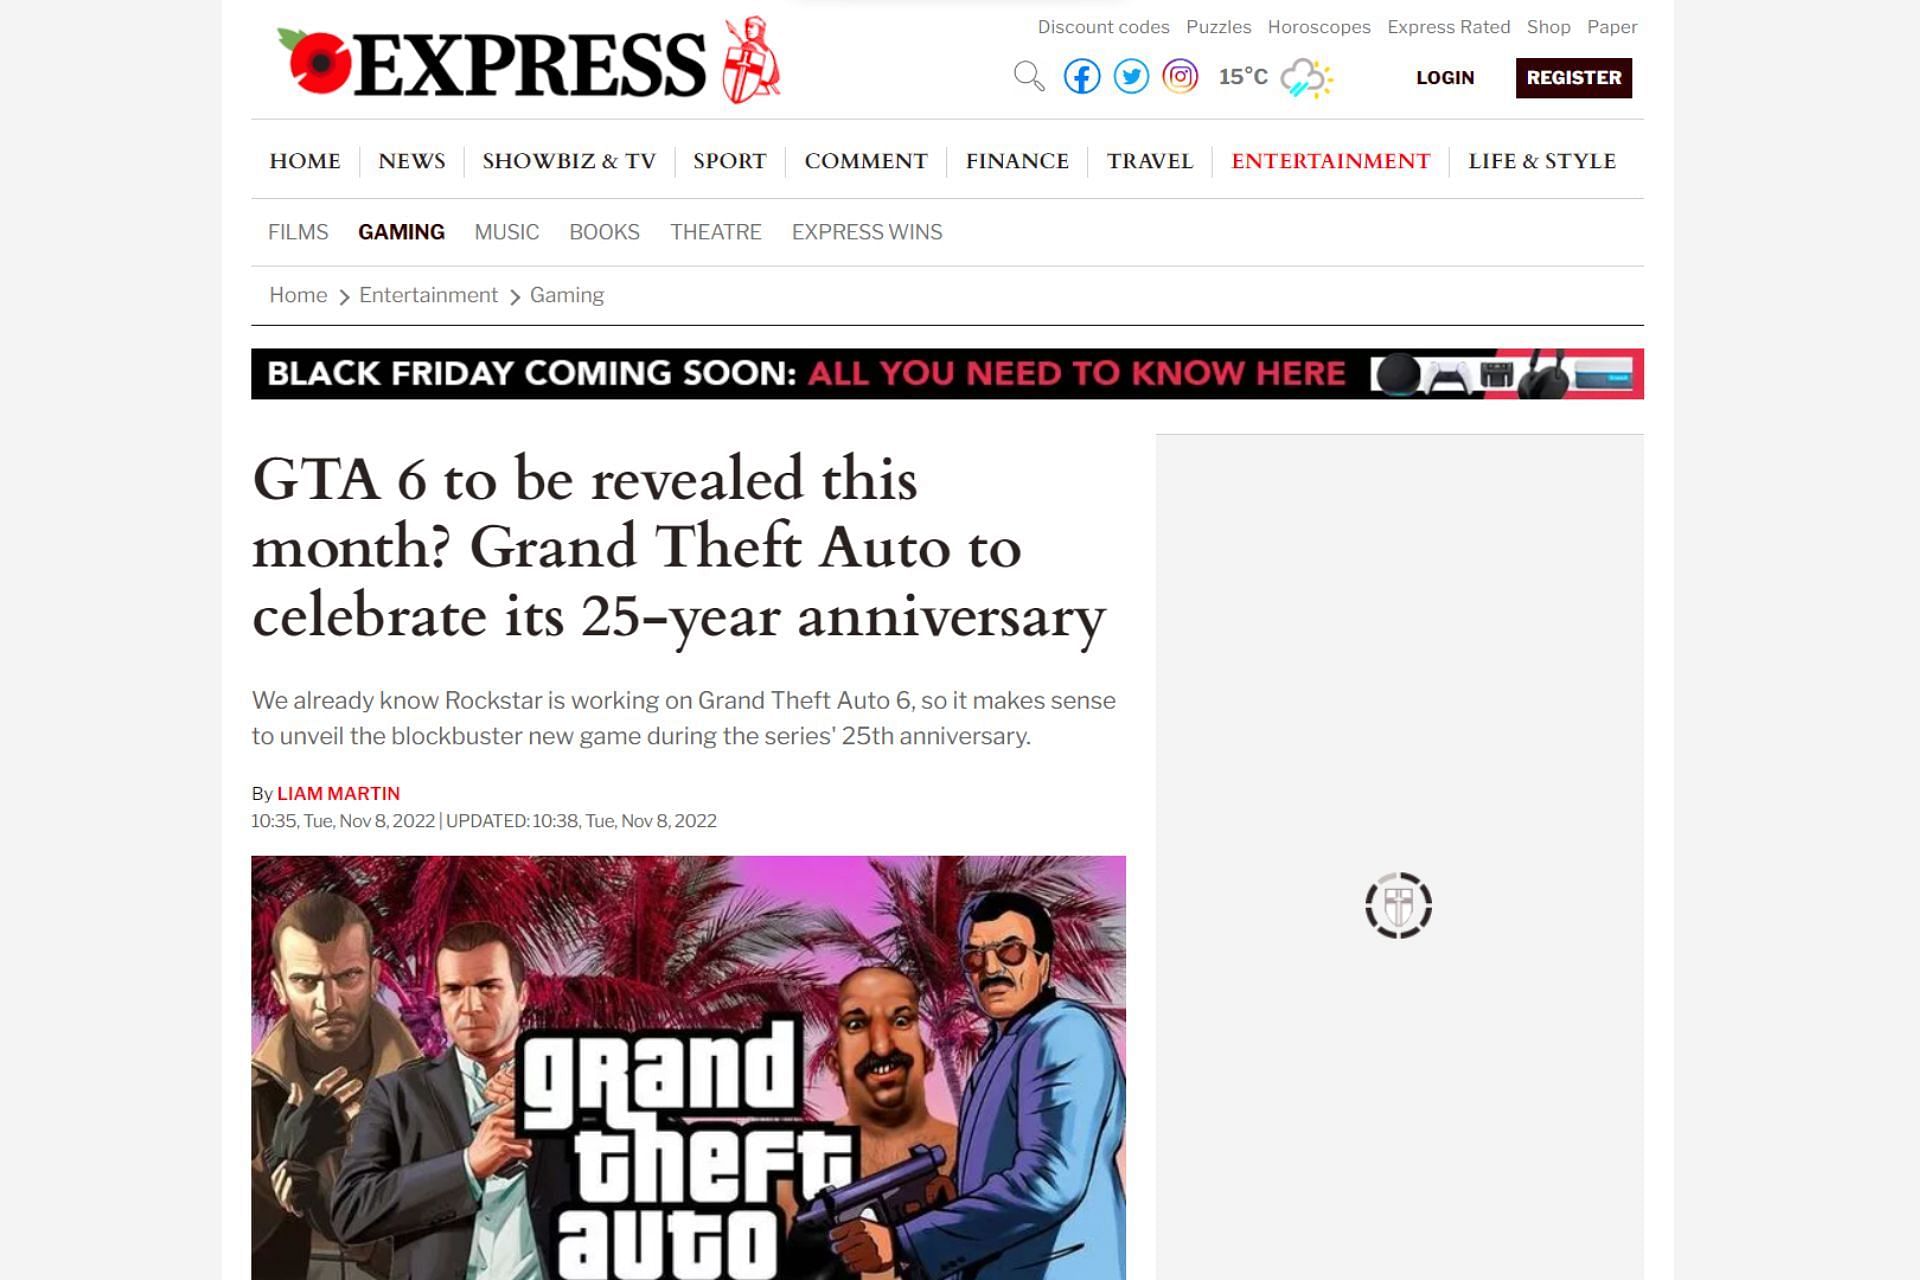 A screenshot of the news from the Express website